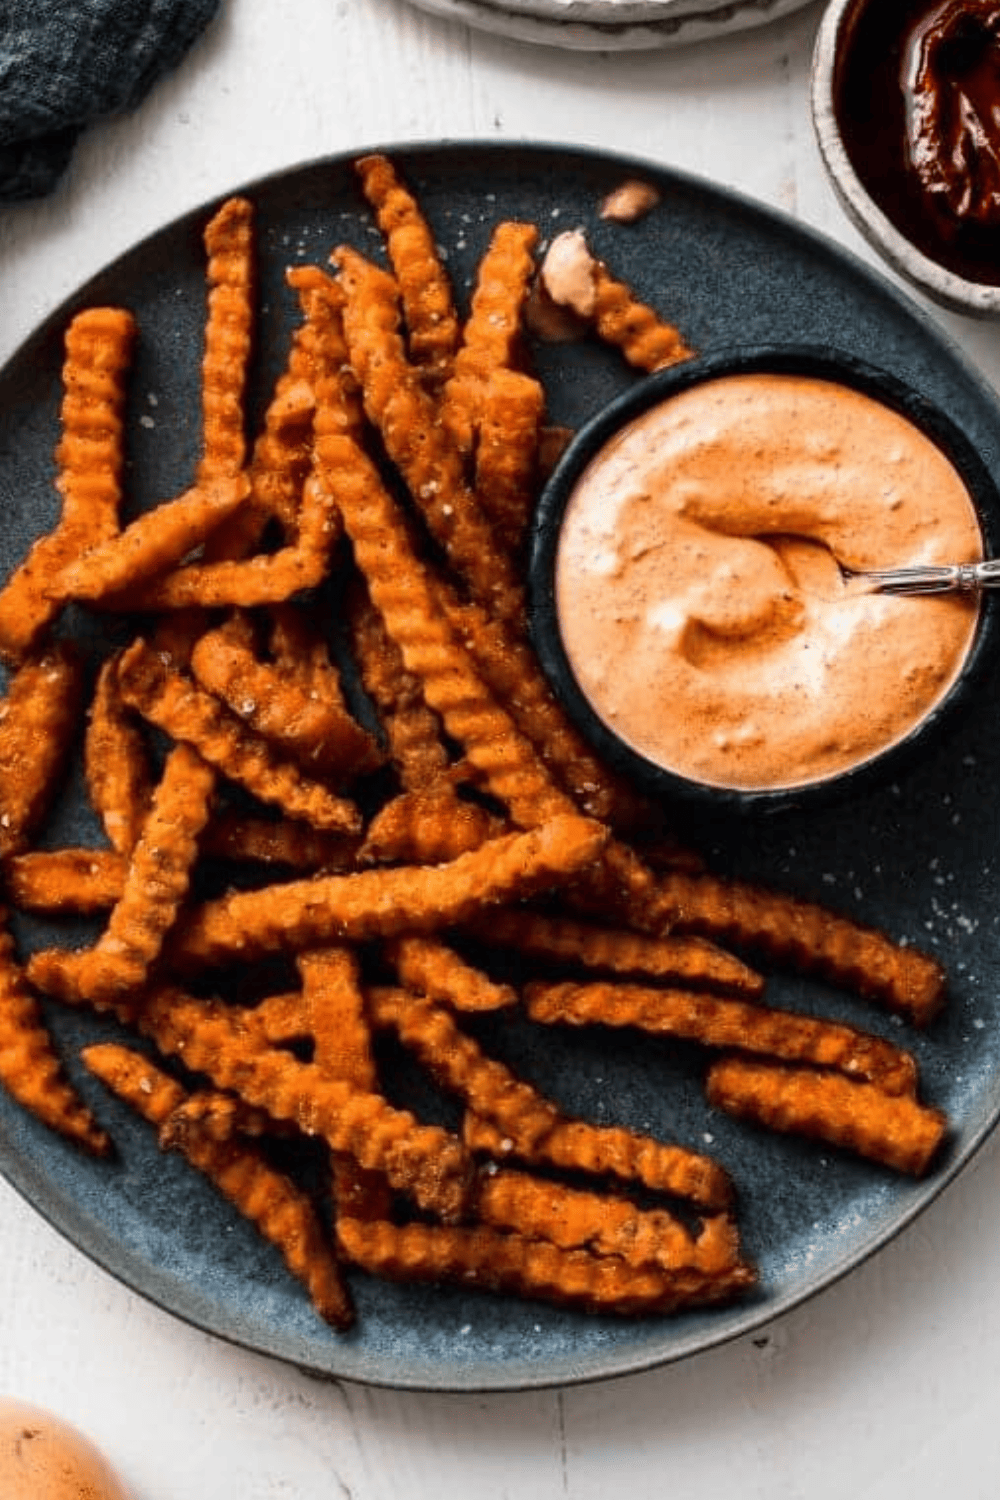 Small bowl of dipping sauce on plate of sweet potato fries.